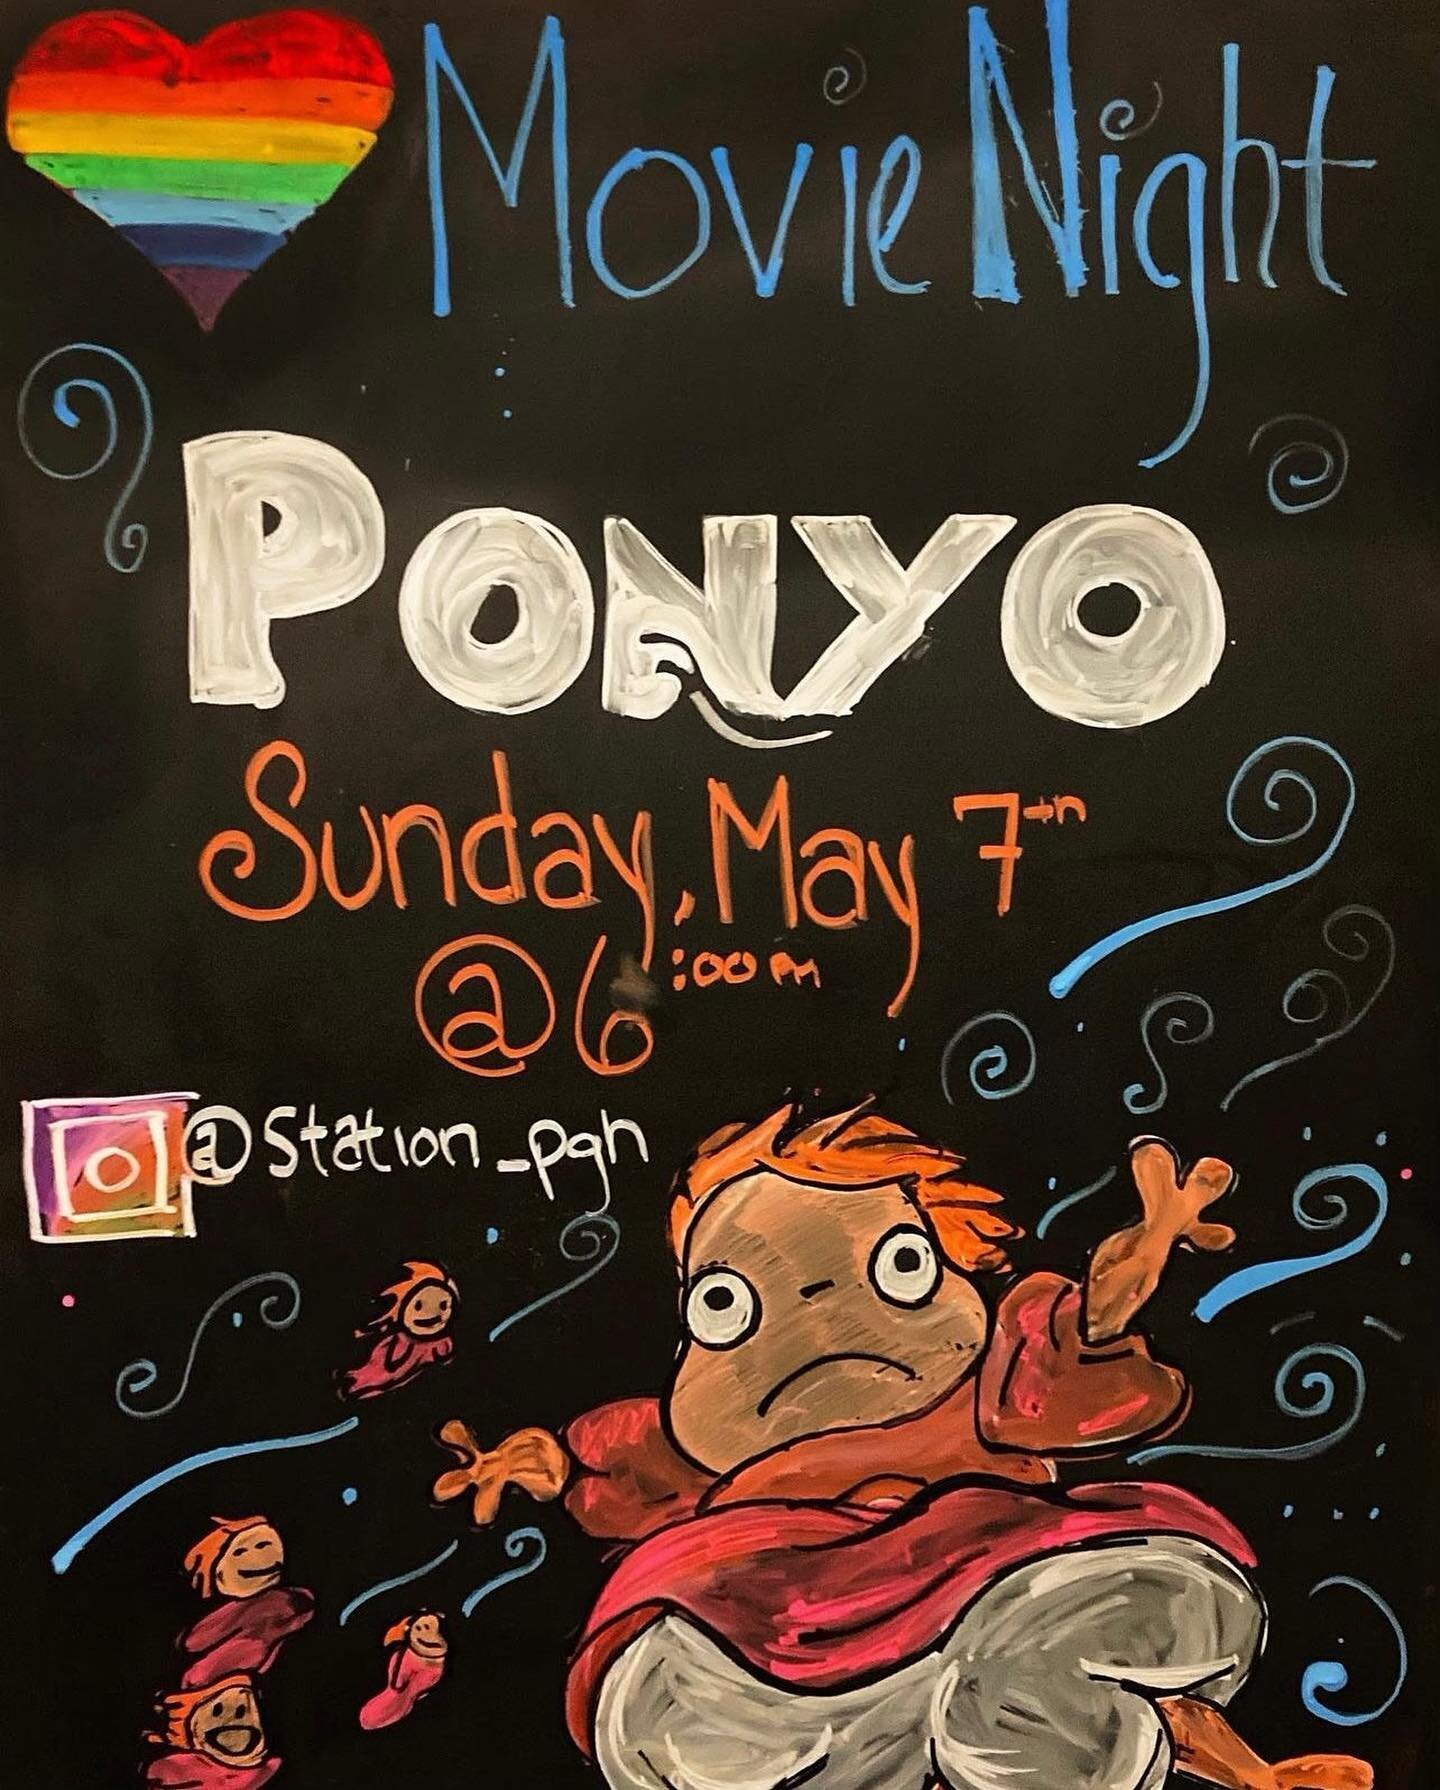 Sunday Funday with us at our next Night @ The Movies!
Come and dissolve into a happier place where we&rsquo;ll be showing the Studio Ghibli classic Ponyo this Sunday, May 7 at 6 PM.
Tickets include a super secret bag of Station branded bar mix &amp; 